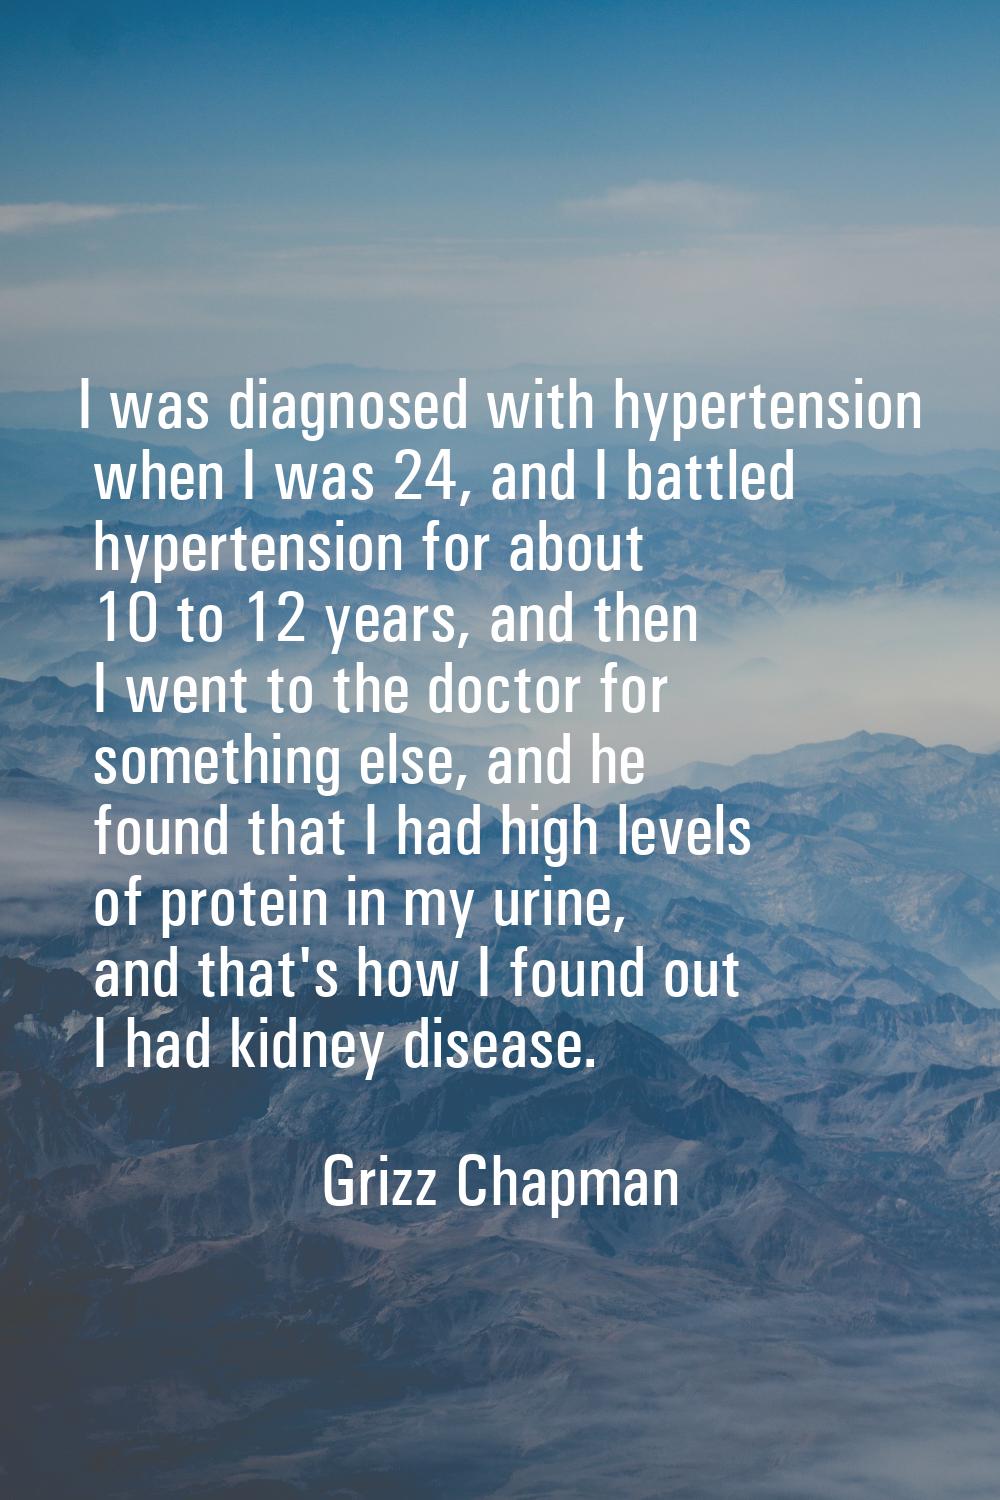 I was diagnosed with hypertension when I was 24, and I battled hypertension for about 10 to 12 year